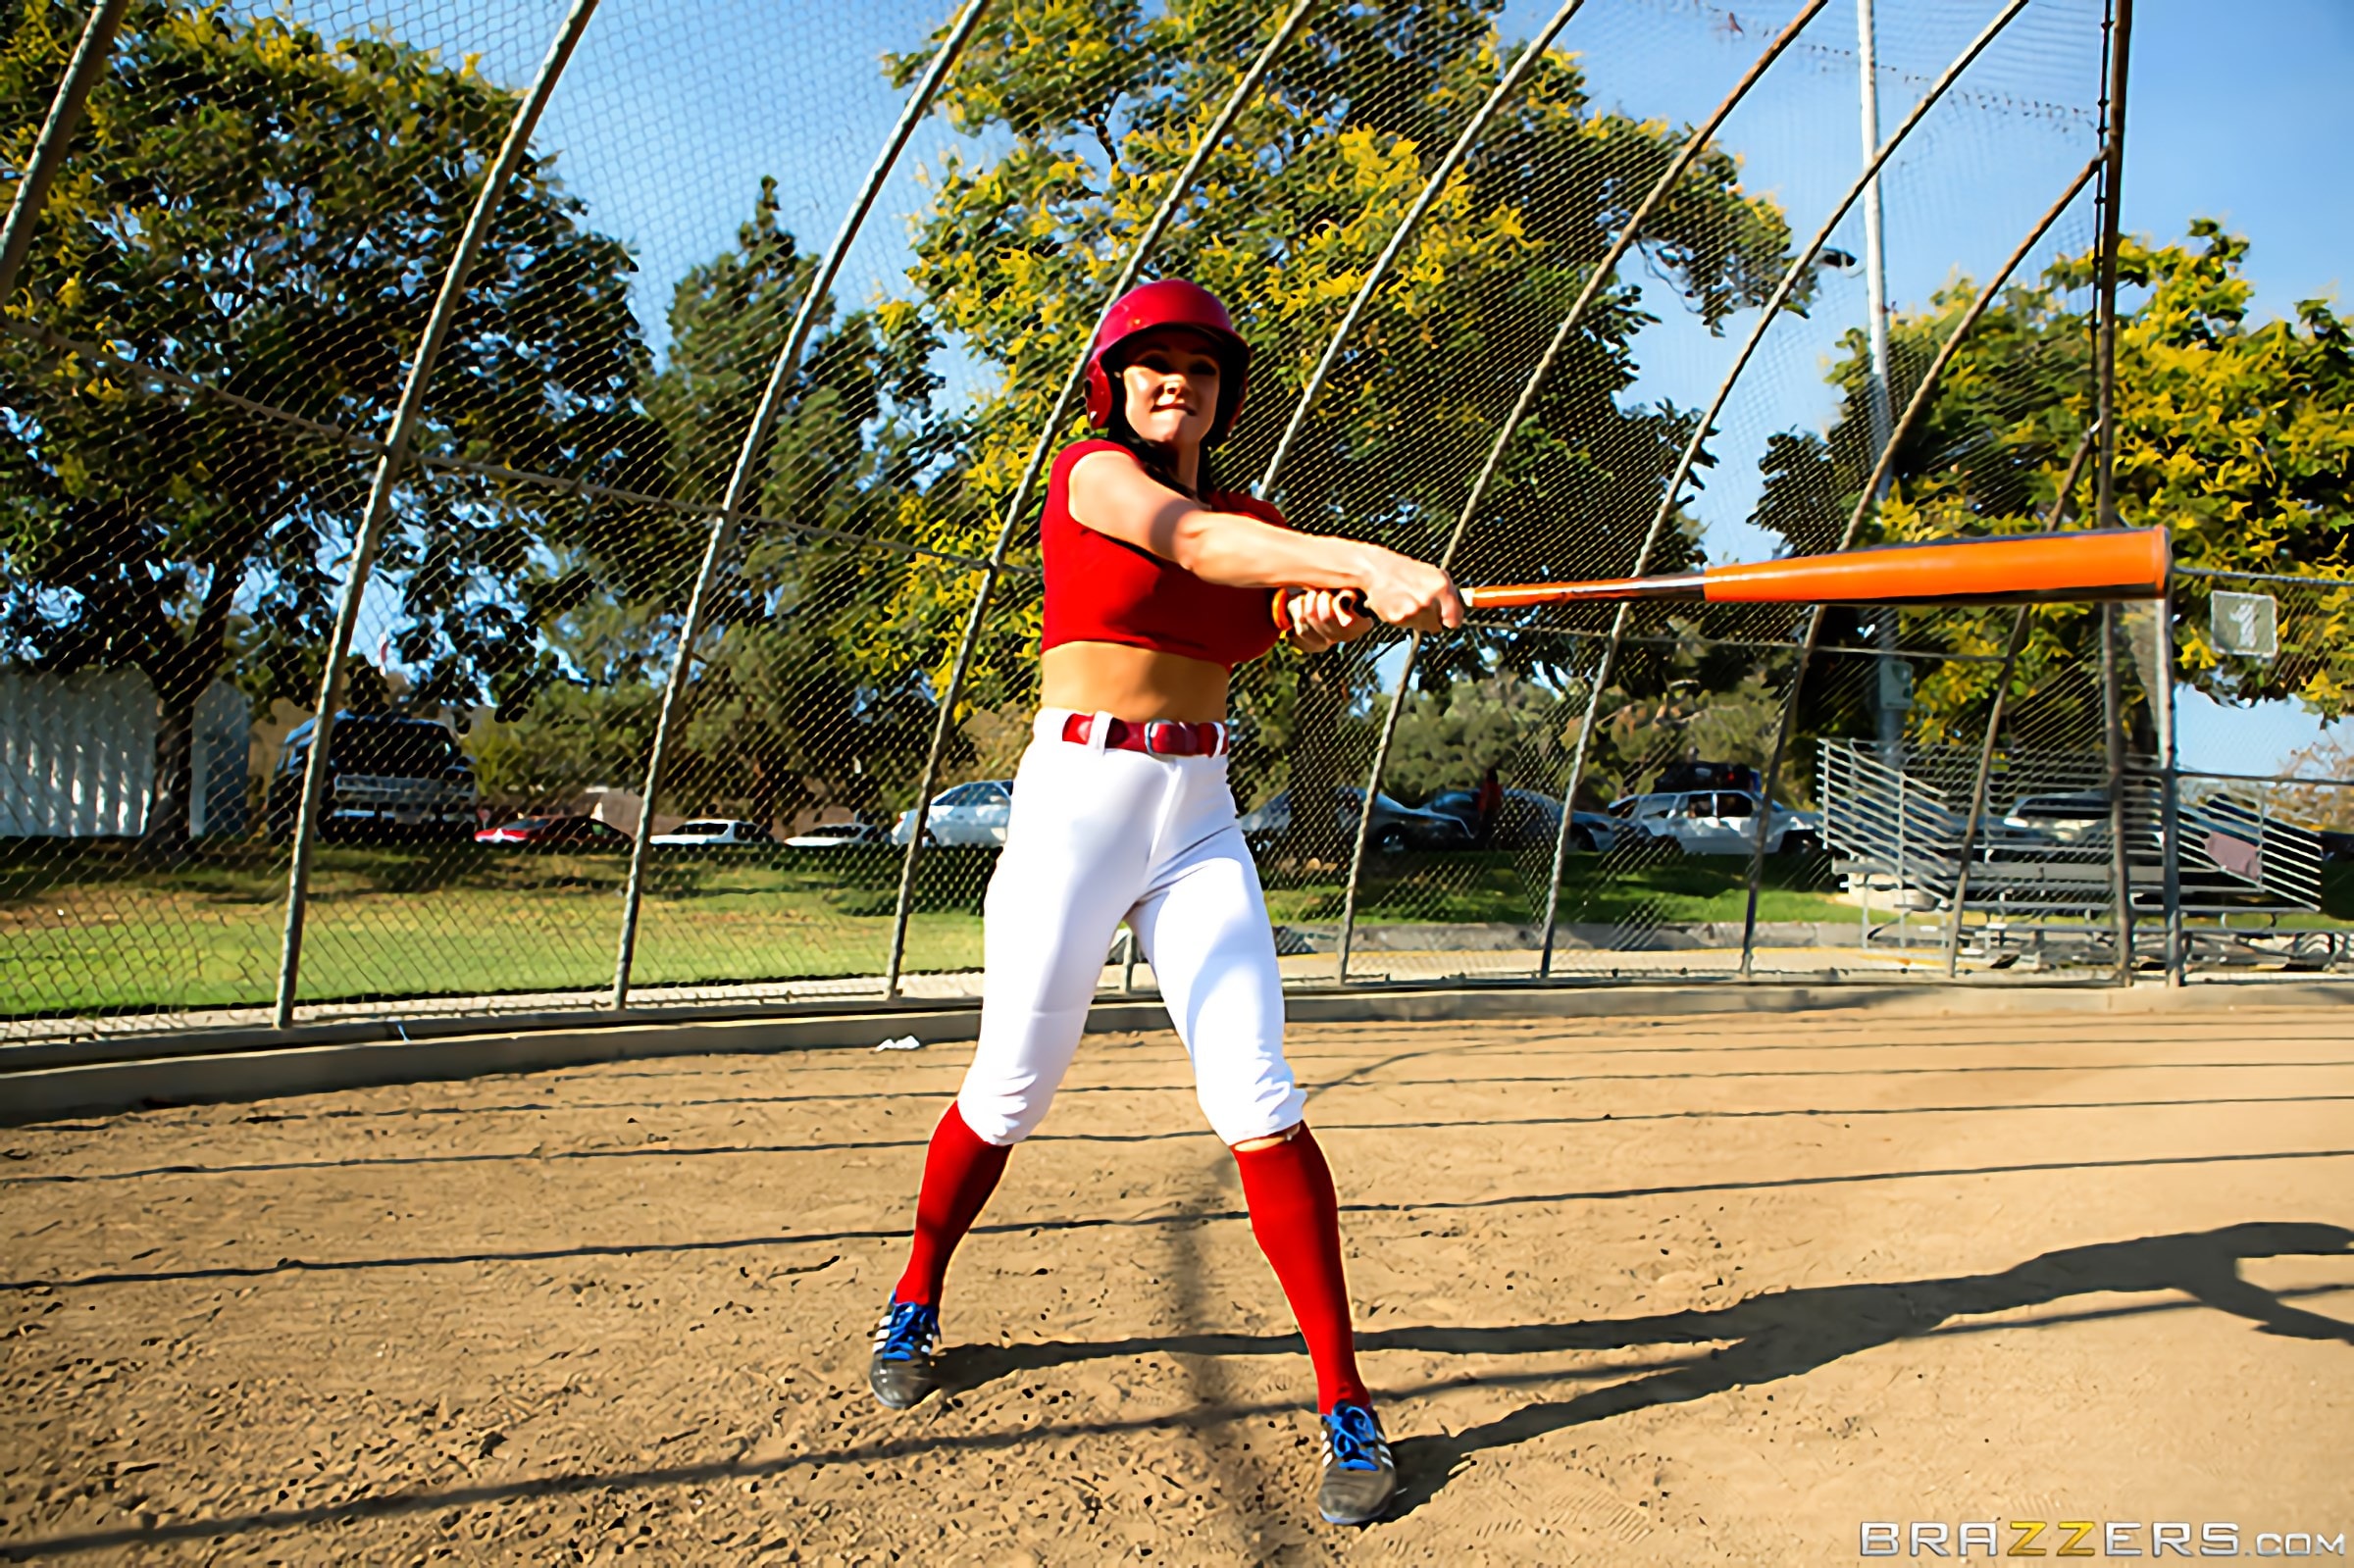 Brazzers 'Audrey Gets the Batter Up' starring Audrey Bitoni (Photo 12)